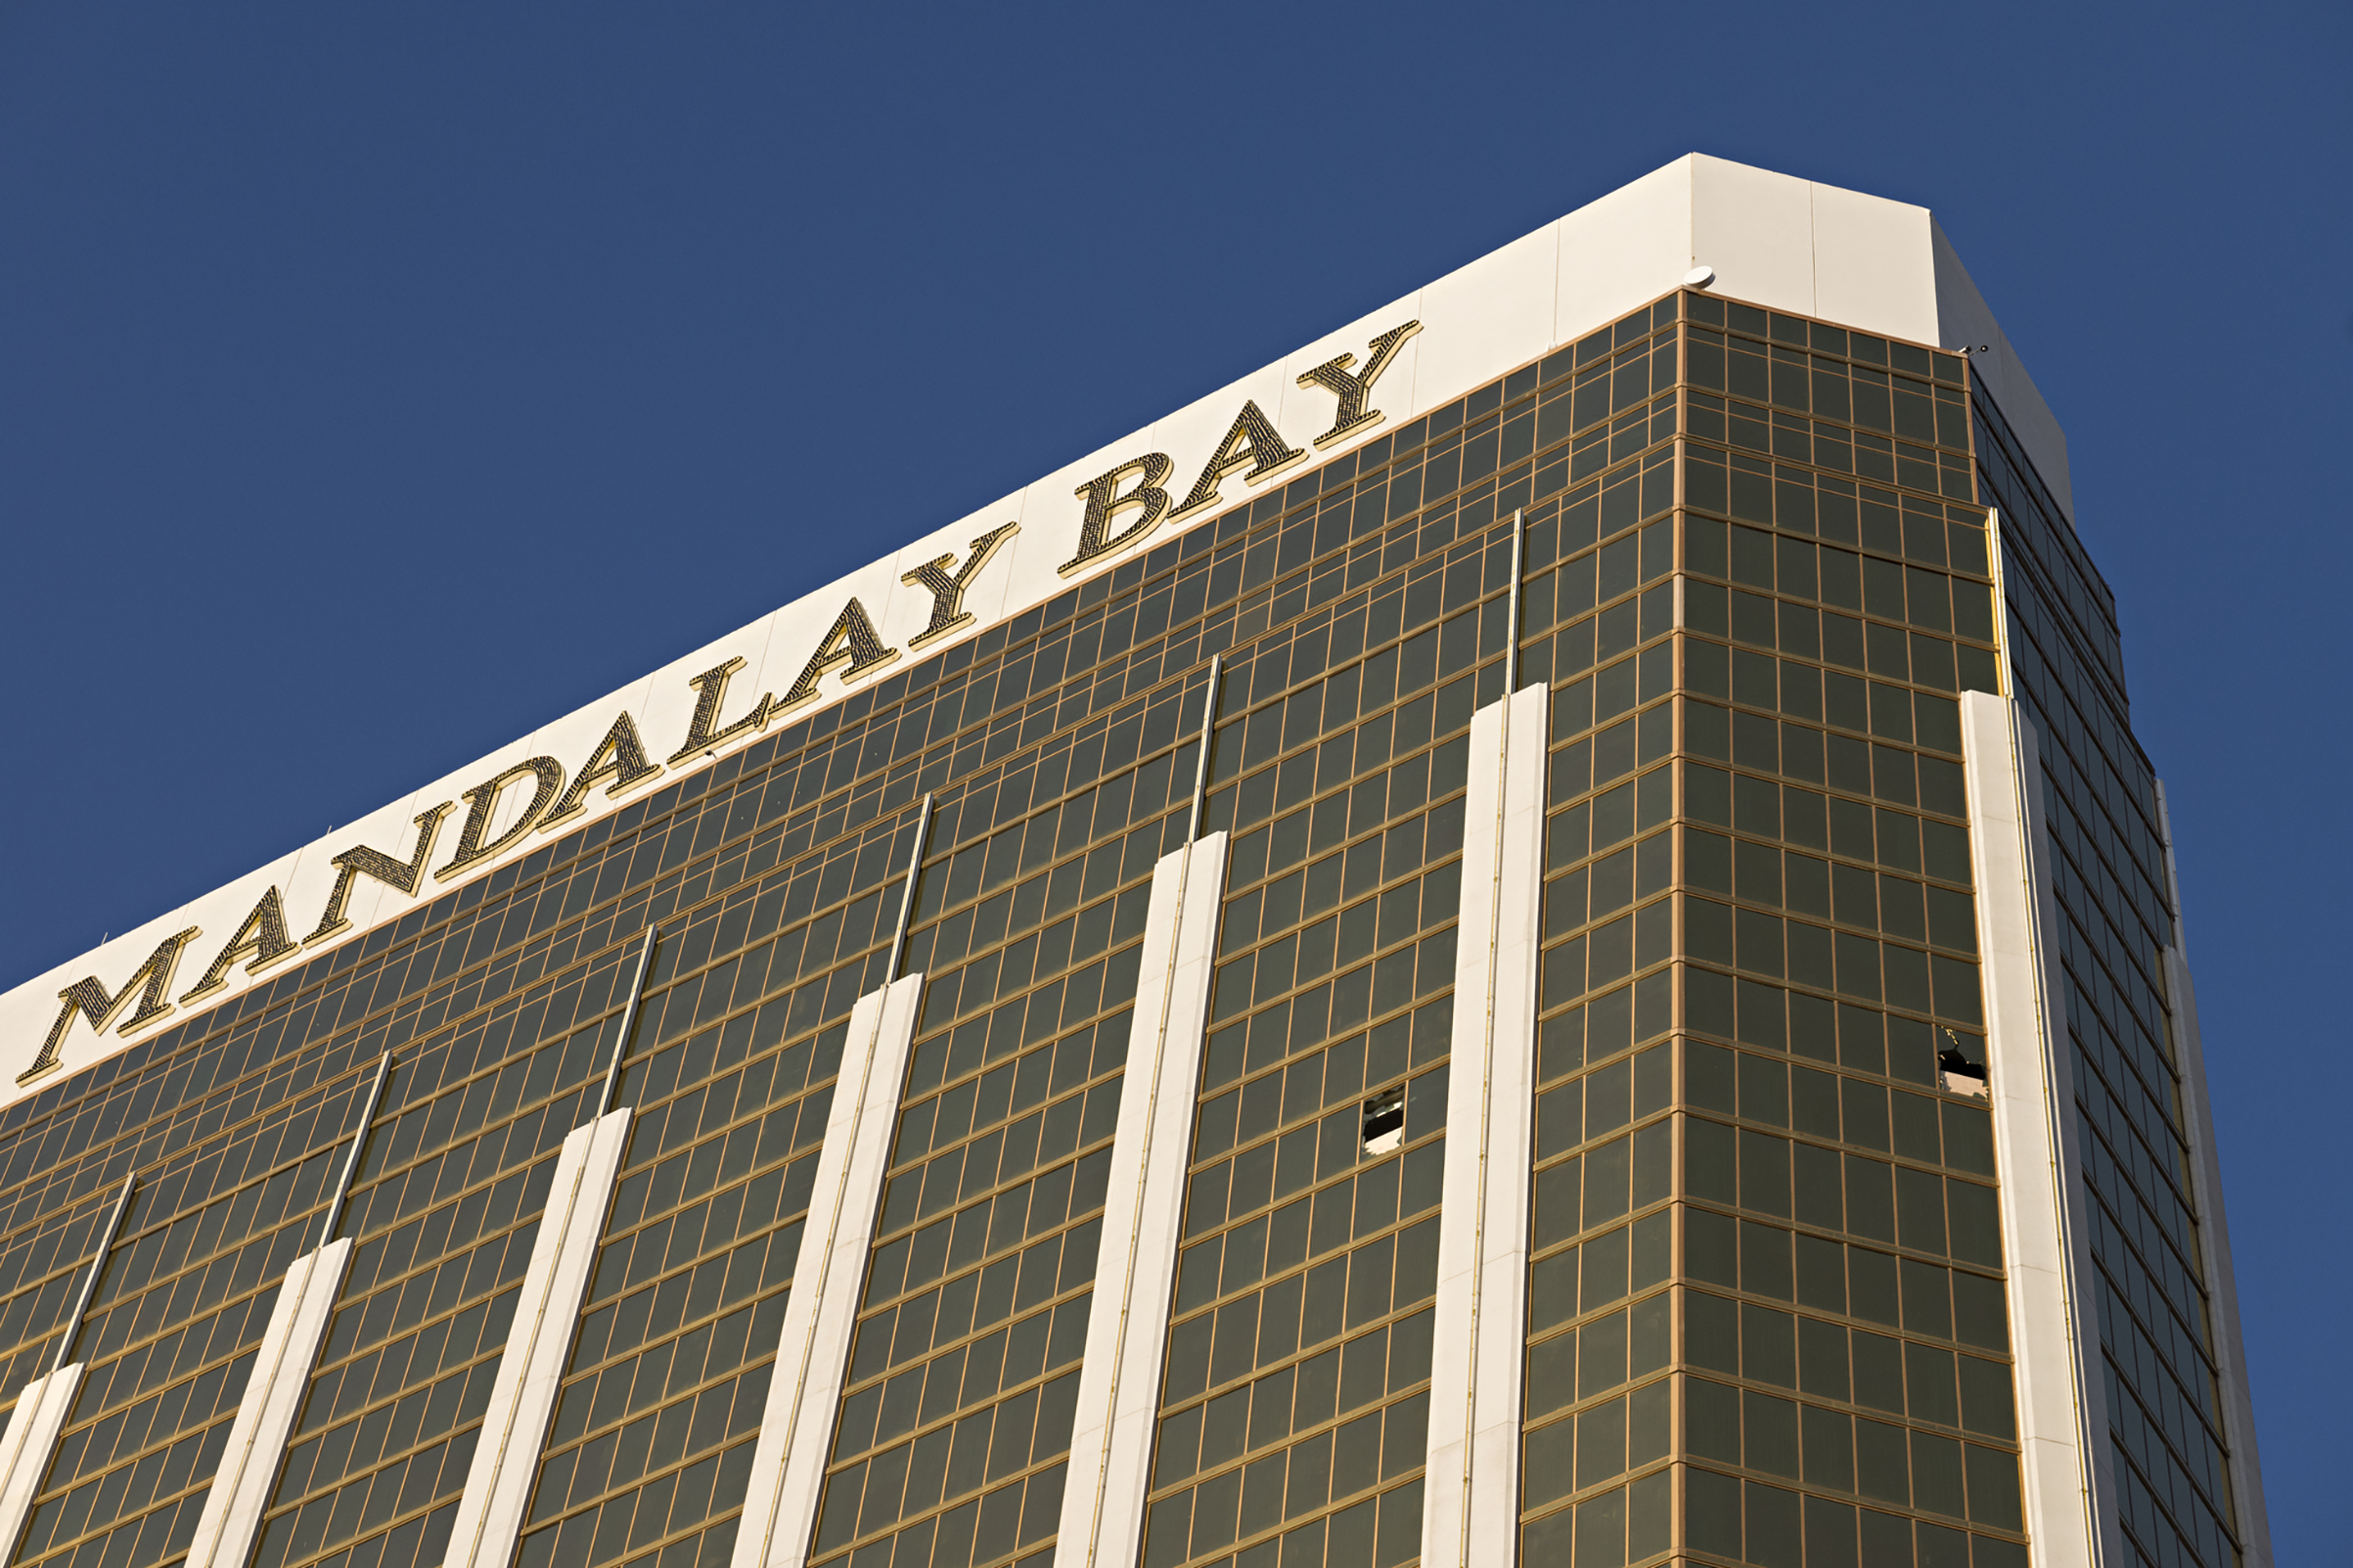 Broken windows on the 32nd floor of the Mandalay Bay Resort and Casino where a gunman opened fire on a concert crowd , Oct. 4, 2017.